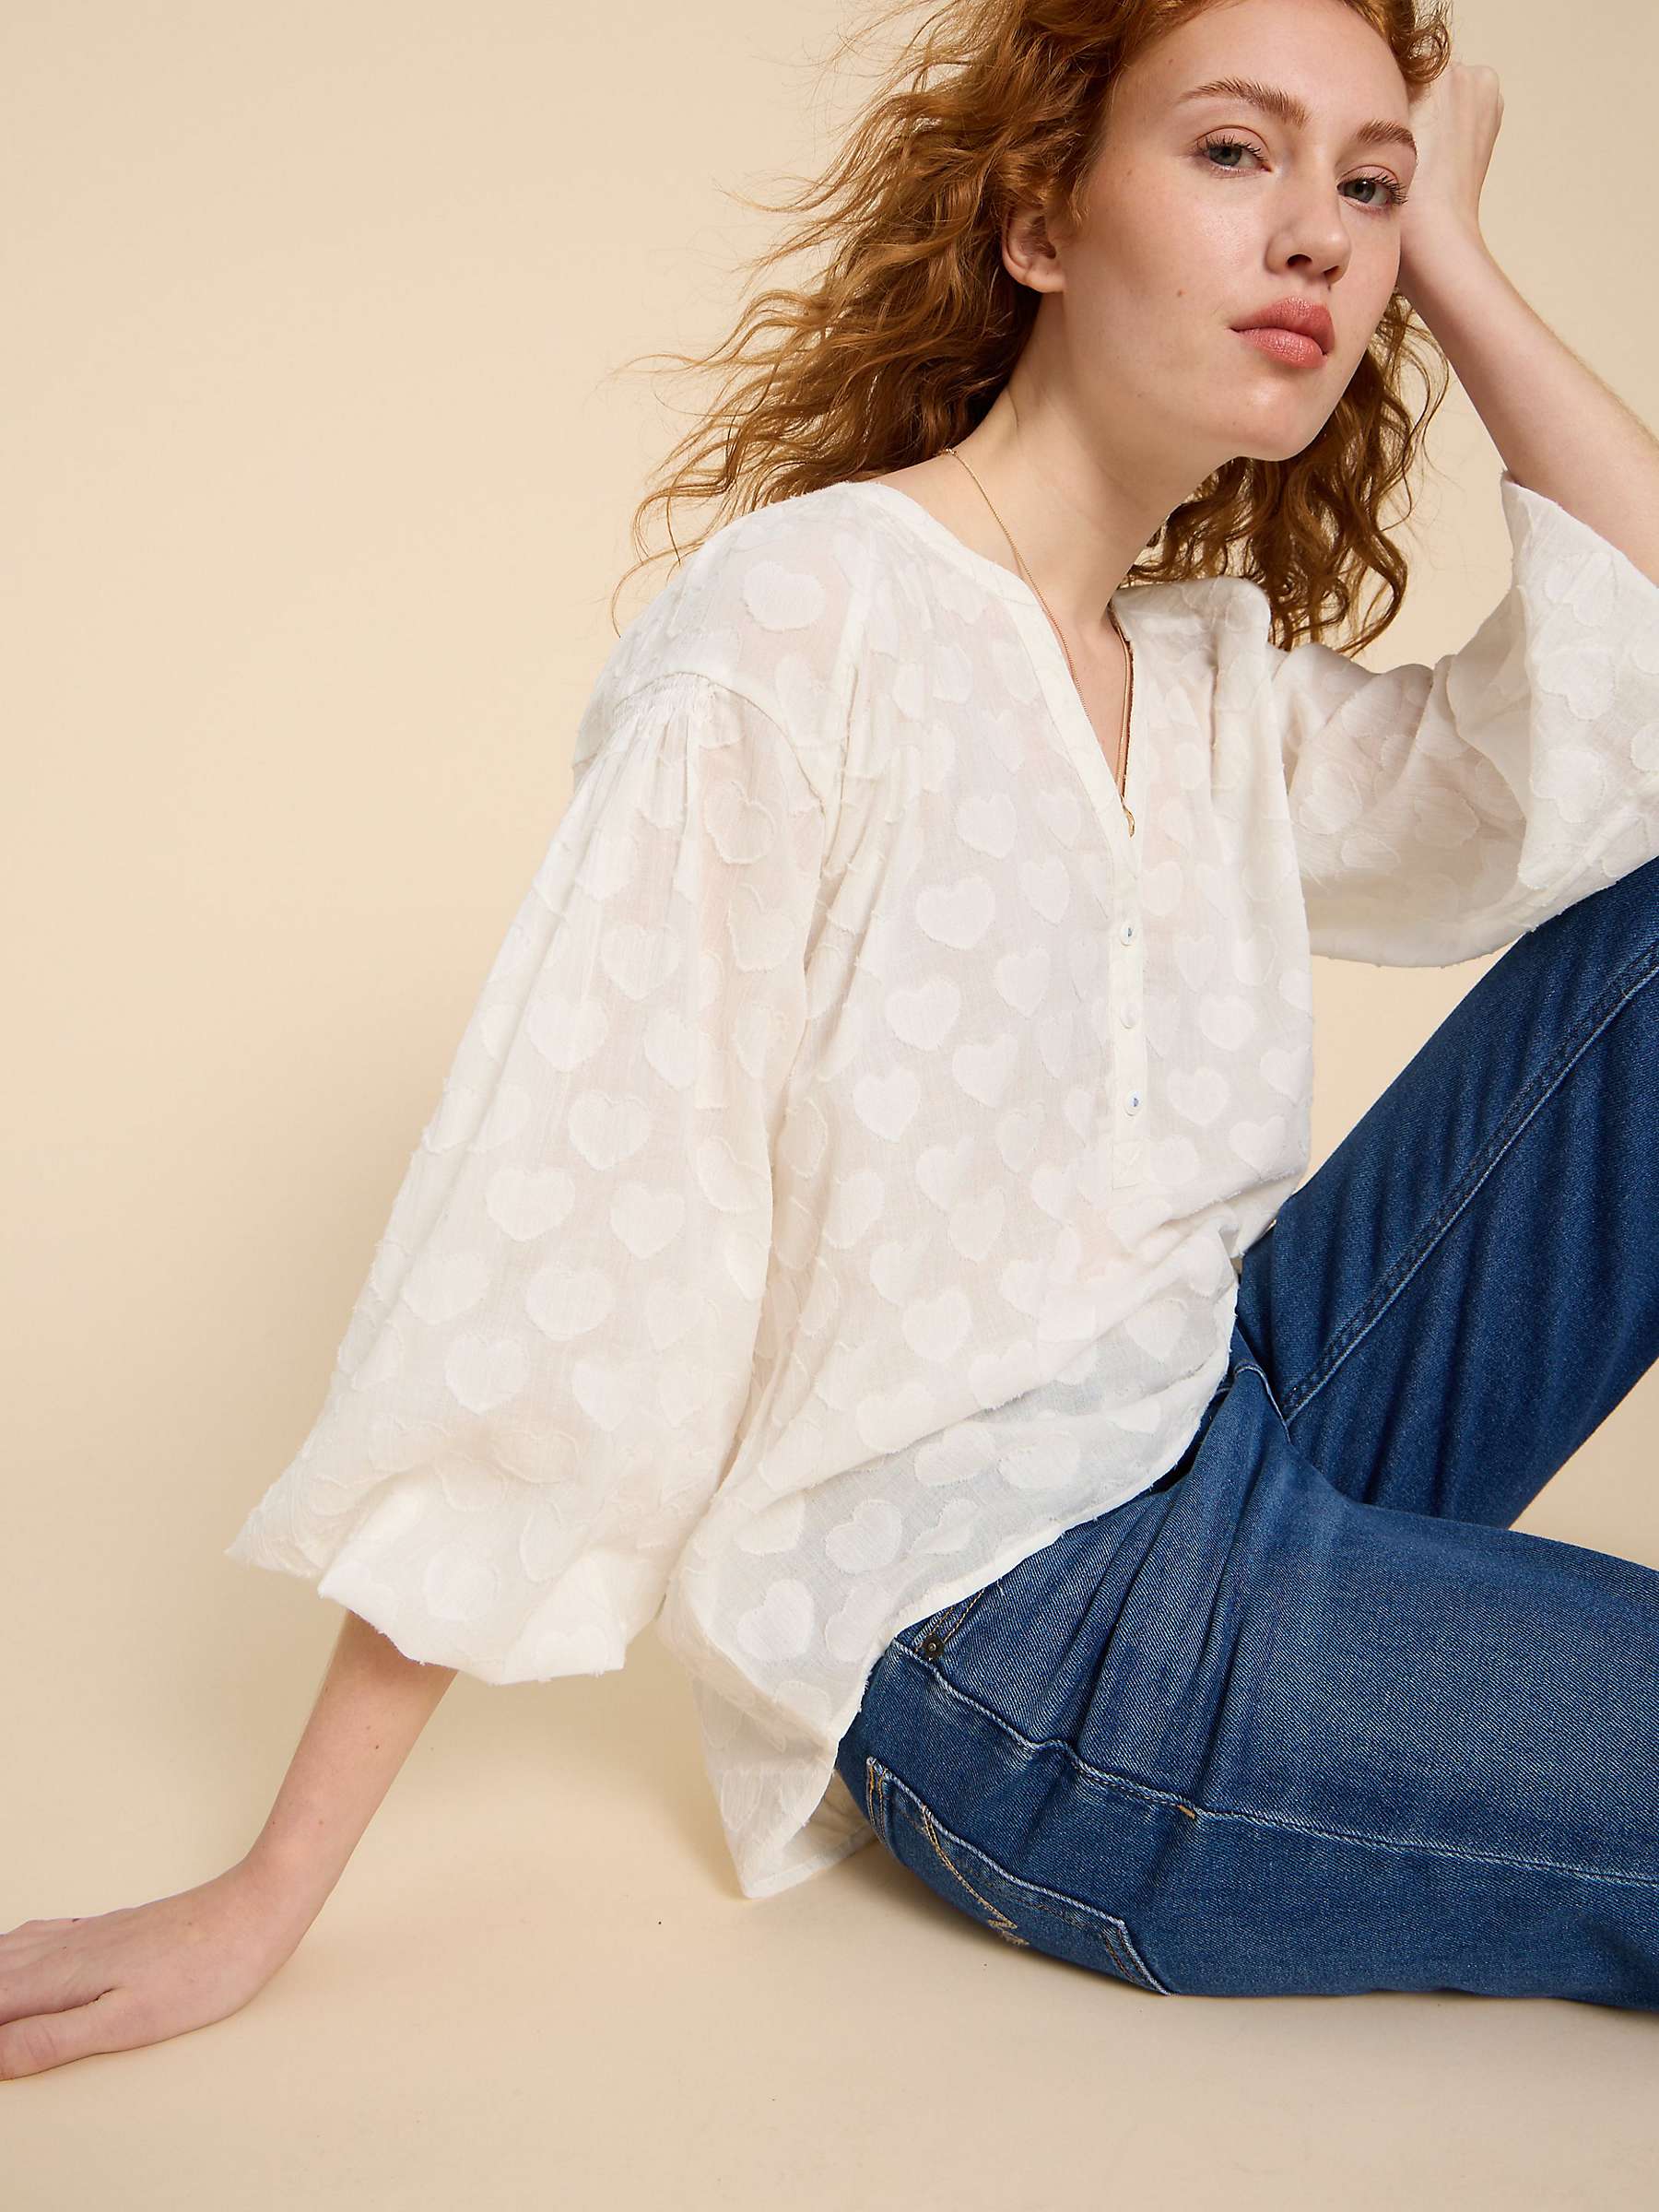 Buy White Stuff Heart Jacquard Top, Pale Ivory Online at johnlewis.com